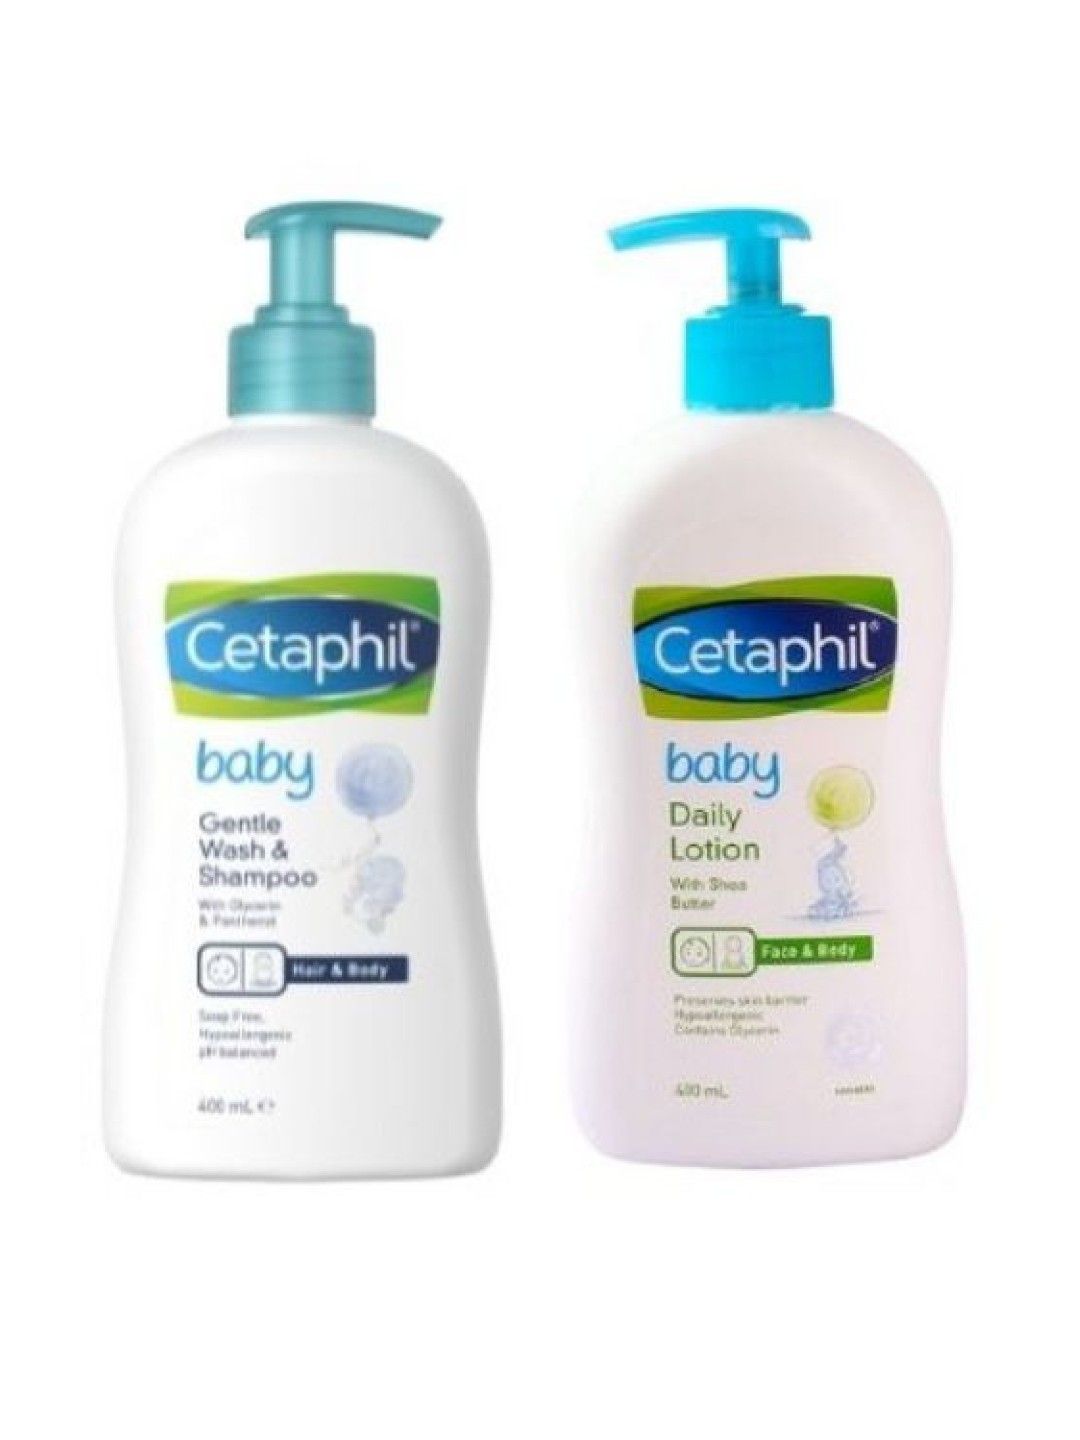 Cetaphil Baby Baby Gentle Wash Shampoo Pump (400ml) + Baby Daily Lotion (400ml)